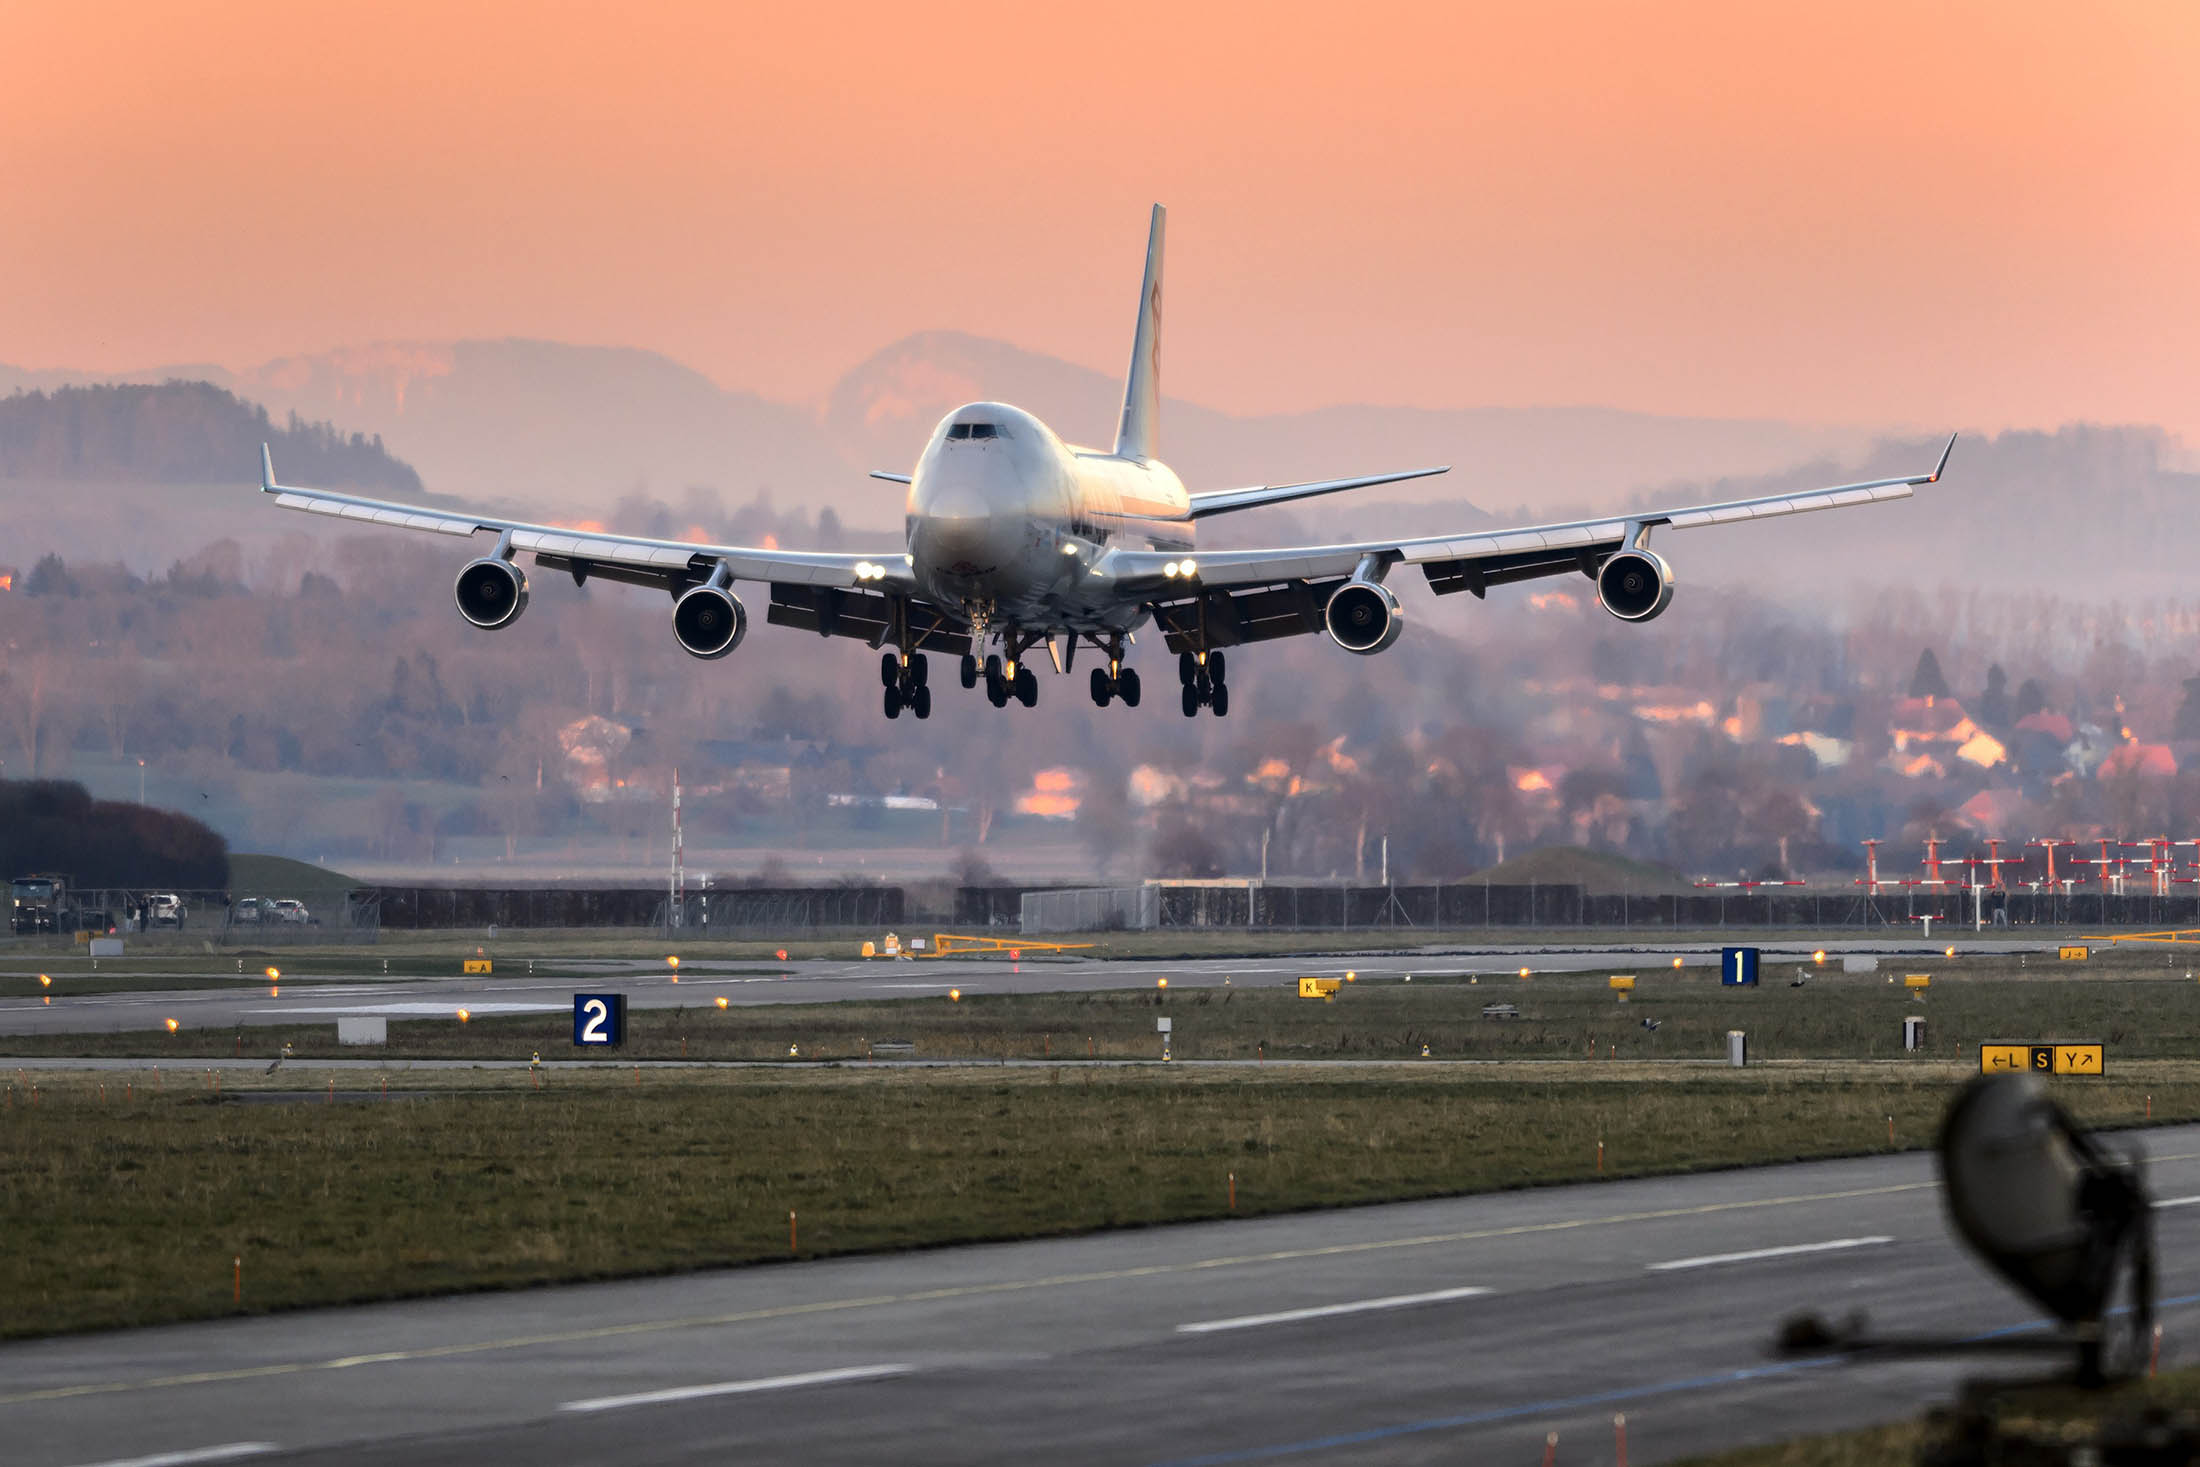 A Cargolux Boeing 747 cargo aircraft lands on January 5, 2015 at Payerne airport. The Boeing will carry solar-powered Solar Impulse 2 aircraft to Abu Dhabi where the attempt to fly around the world in stages using only solar energy will start on March 2015. AFP PHOTO / FABRICE COFFRINI (Photo credit should read FABRICE COFFRINI/AFP/Getty Images)
